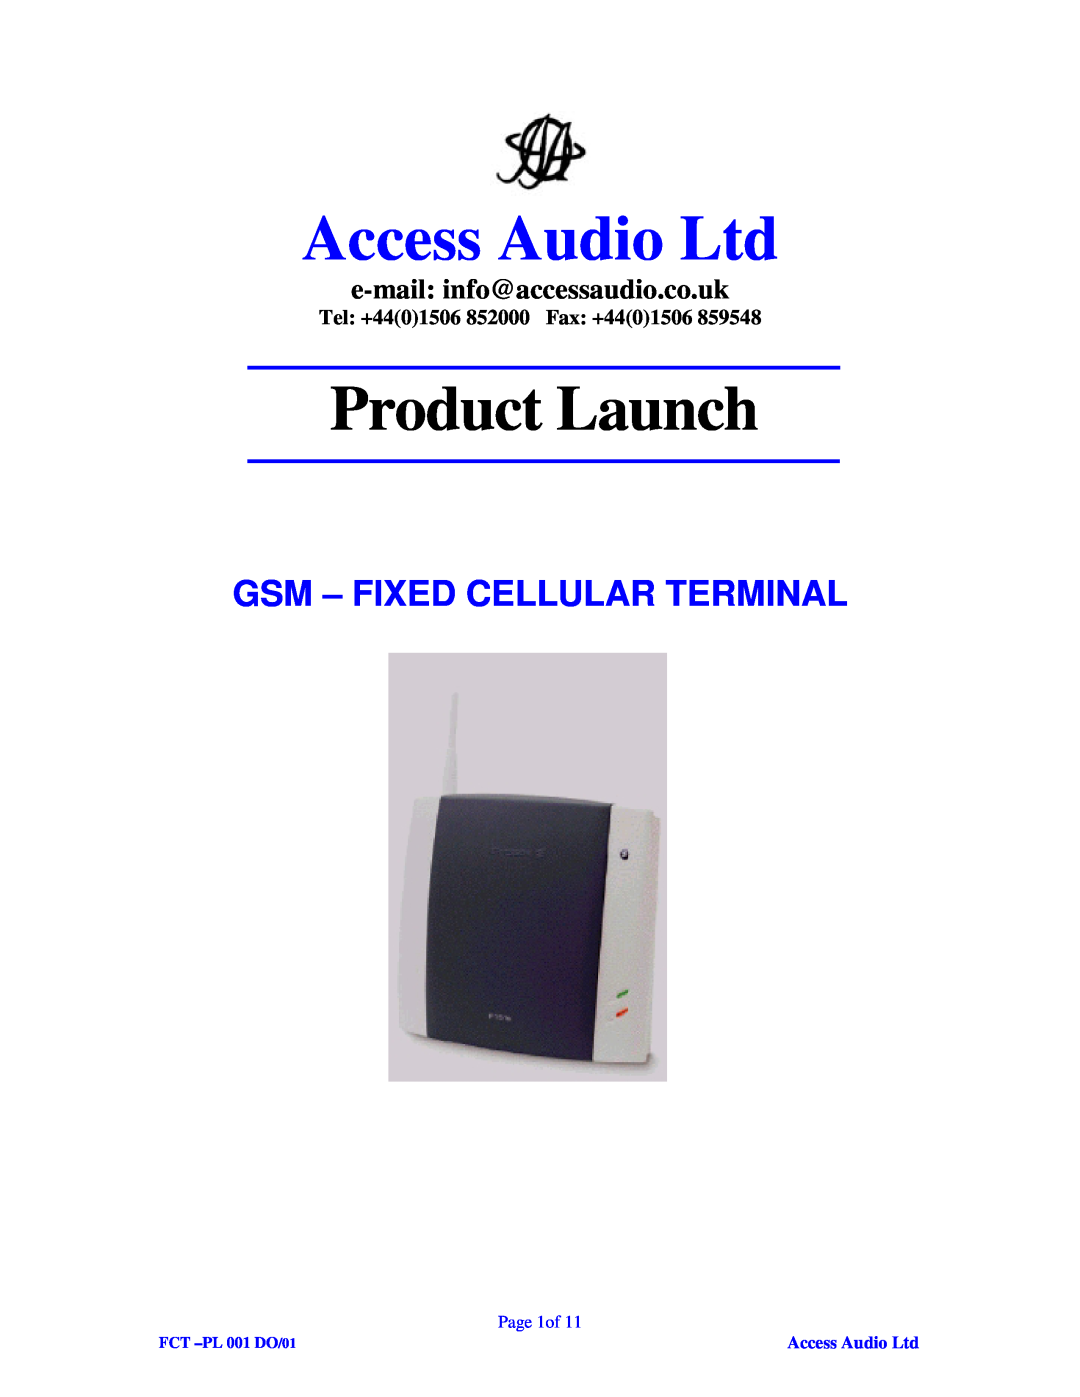 AOC none manual e-mail:info@accessaudio.co.uk, Product Launch, Gsm - Fixed Cellular Terminal, Page 1of, FCT -PL001 DO/01 